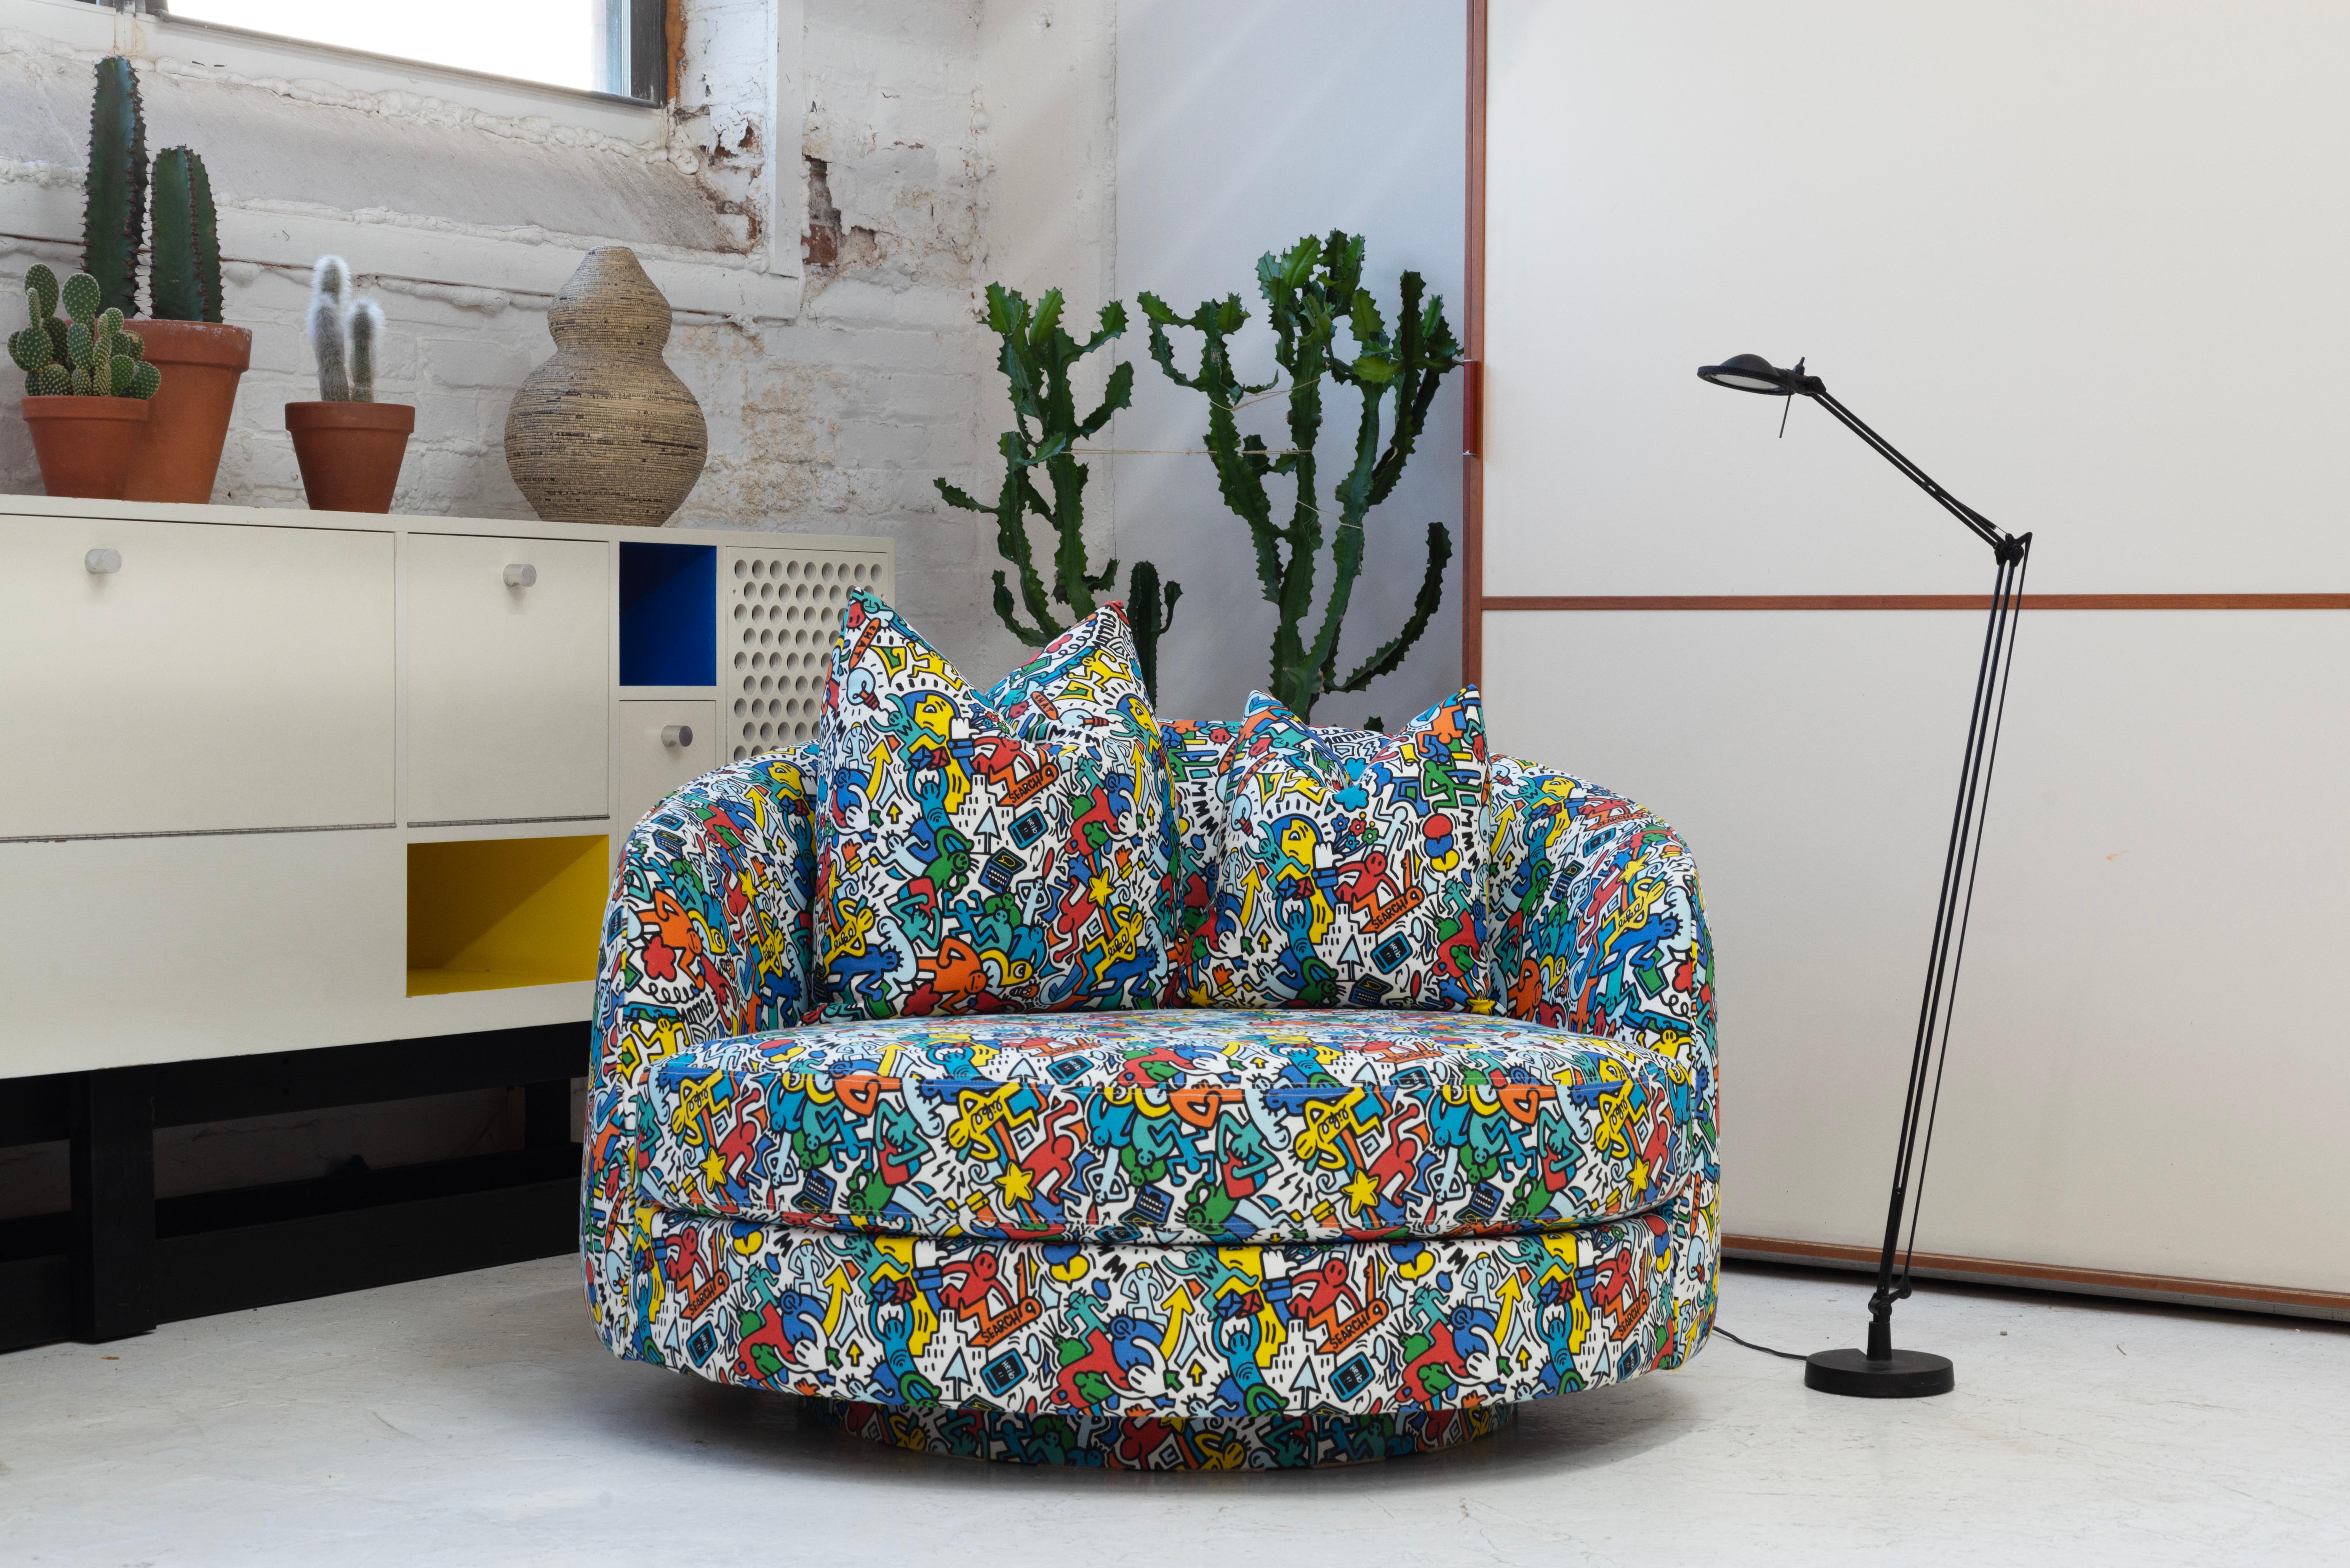 Upholstered with new foam in Keith Haring Style Fabric made in Spain. Chair swivels 360 degrees with two down pillows.